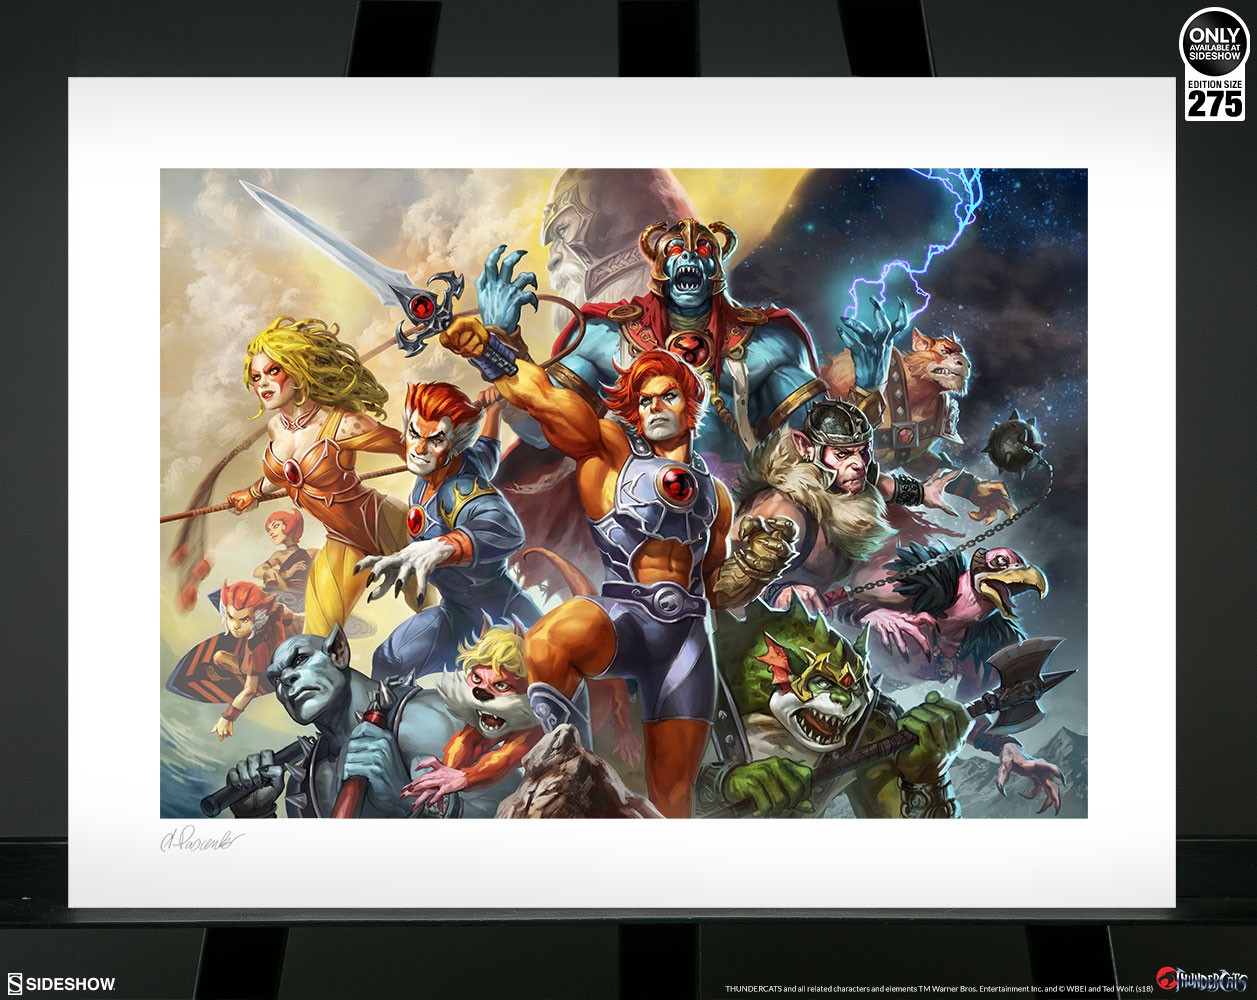 ThunderCats Exclusive Edition View 7